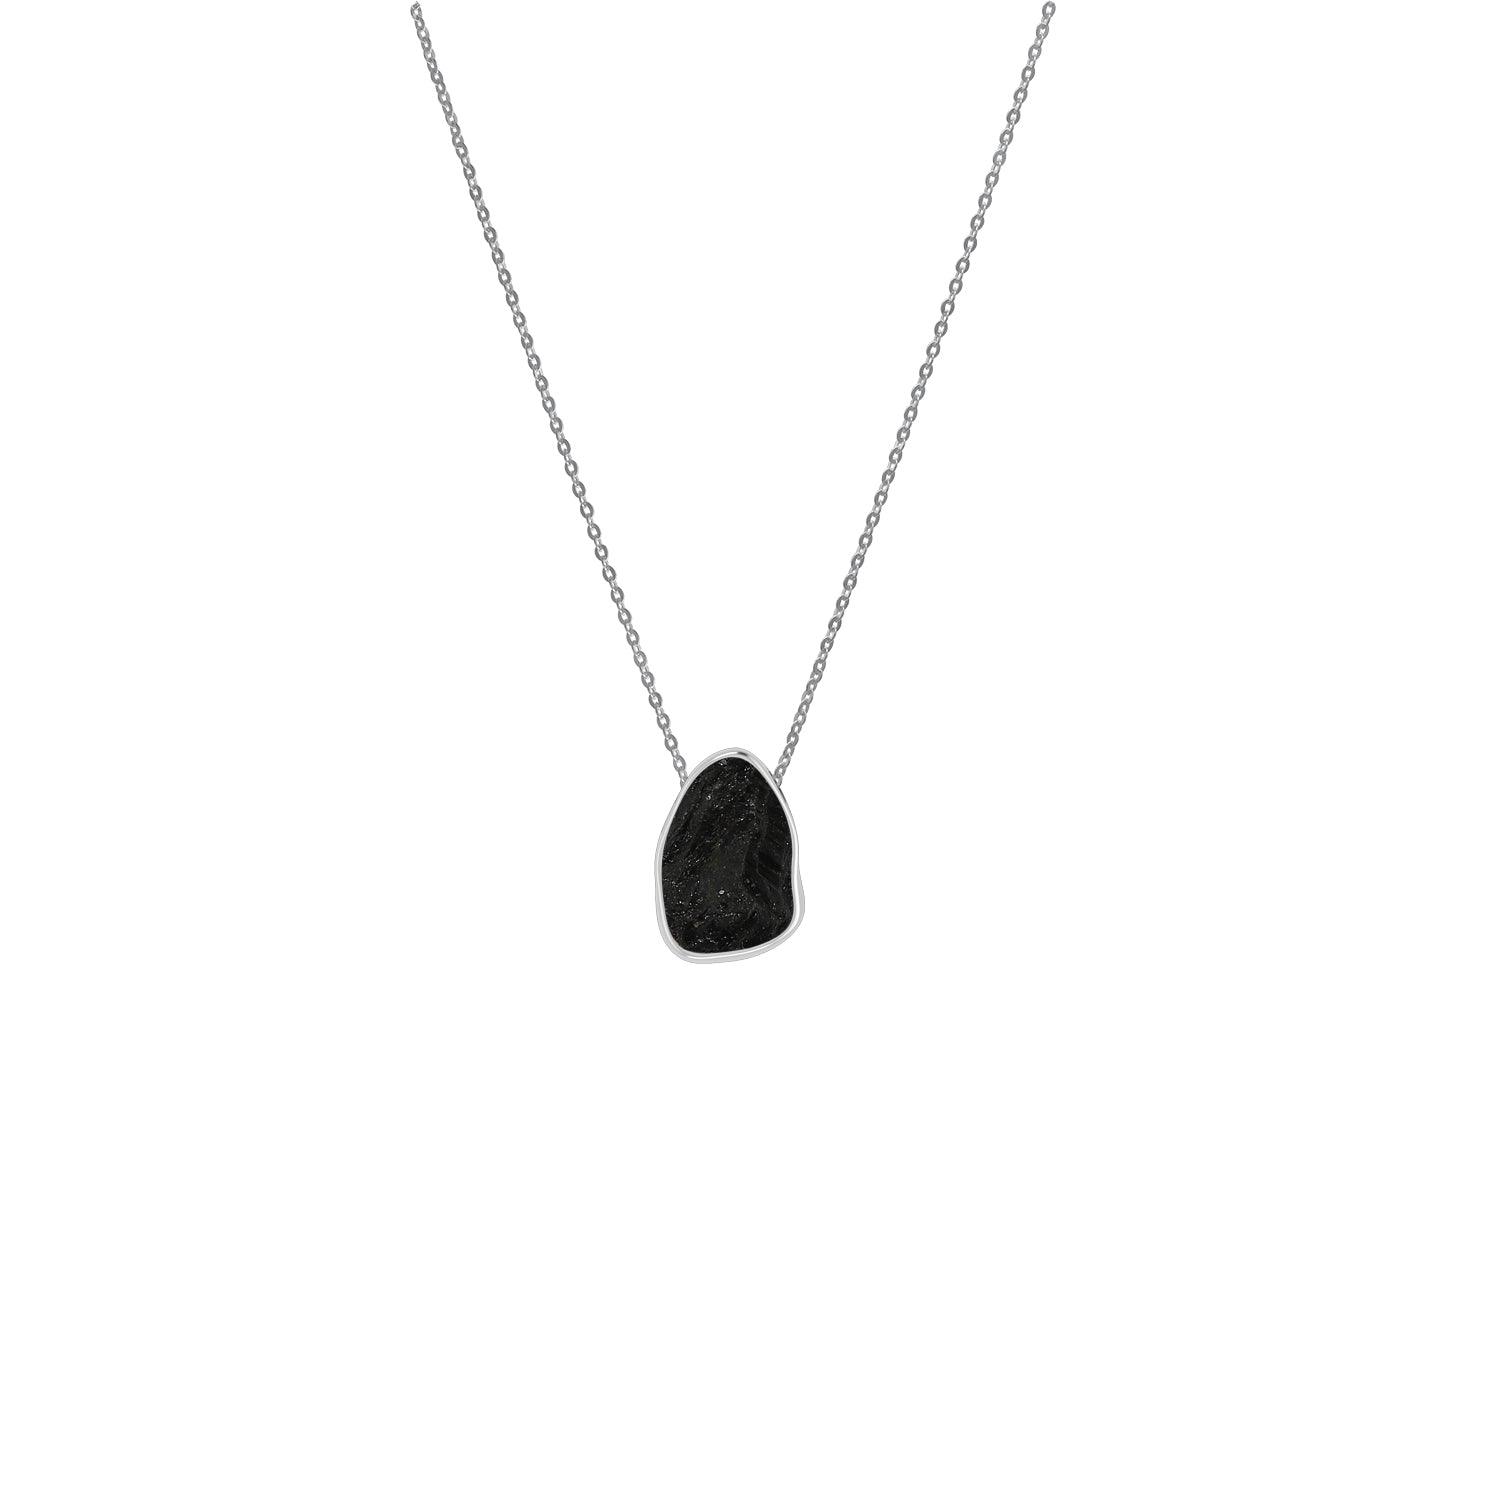 925 Sterling Silver Rough Black Tourmaline Slider Necklace With Chain 18" Bezel Set Jewelry Pack of 6